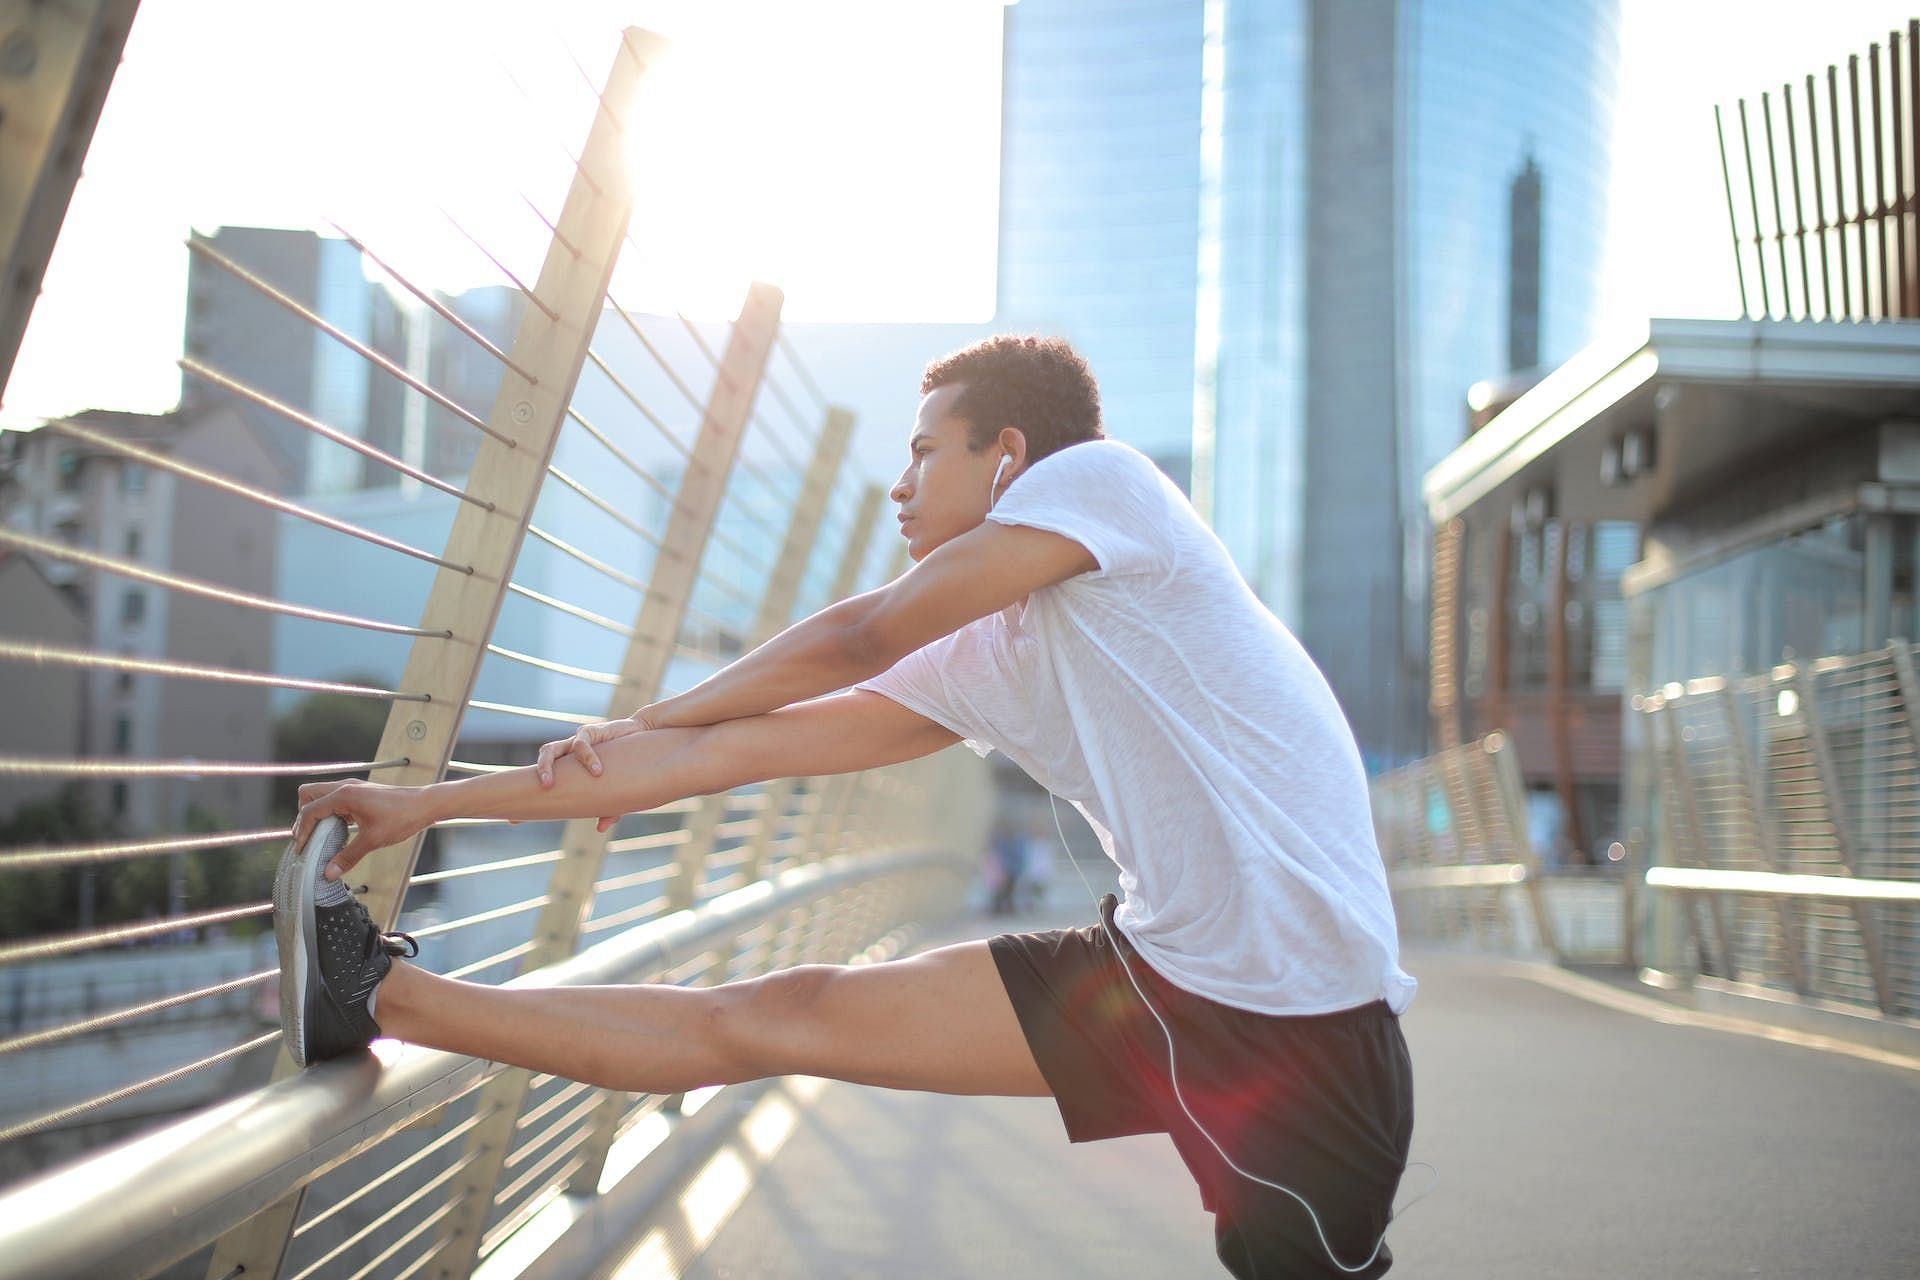 Leg stretches before workout boosts blood circulation. (Image via Pexels/Andrea Piacquadio)